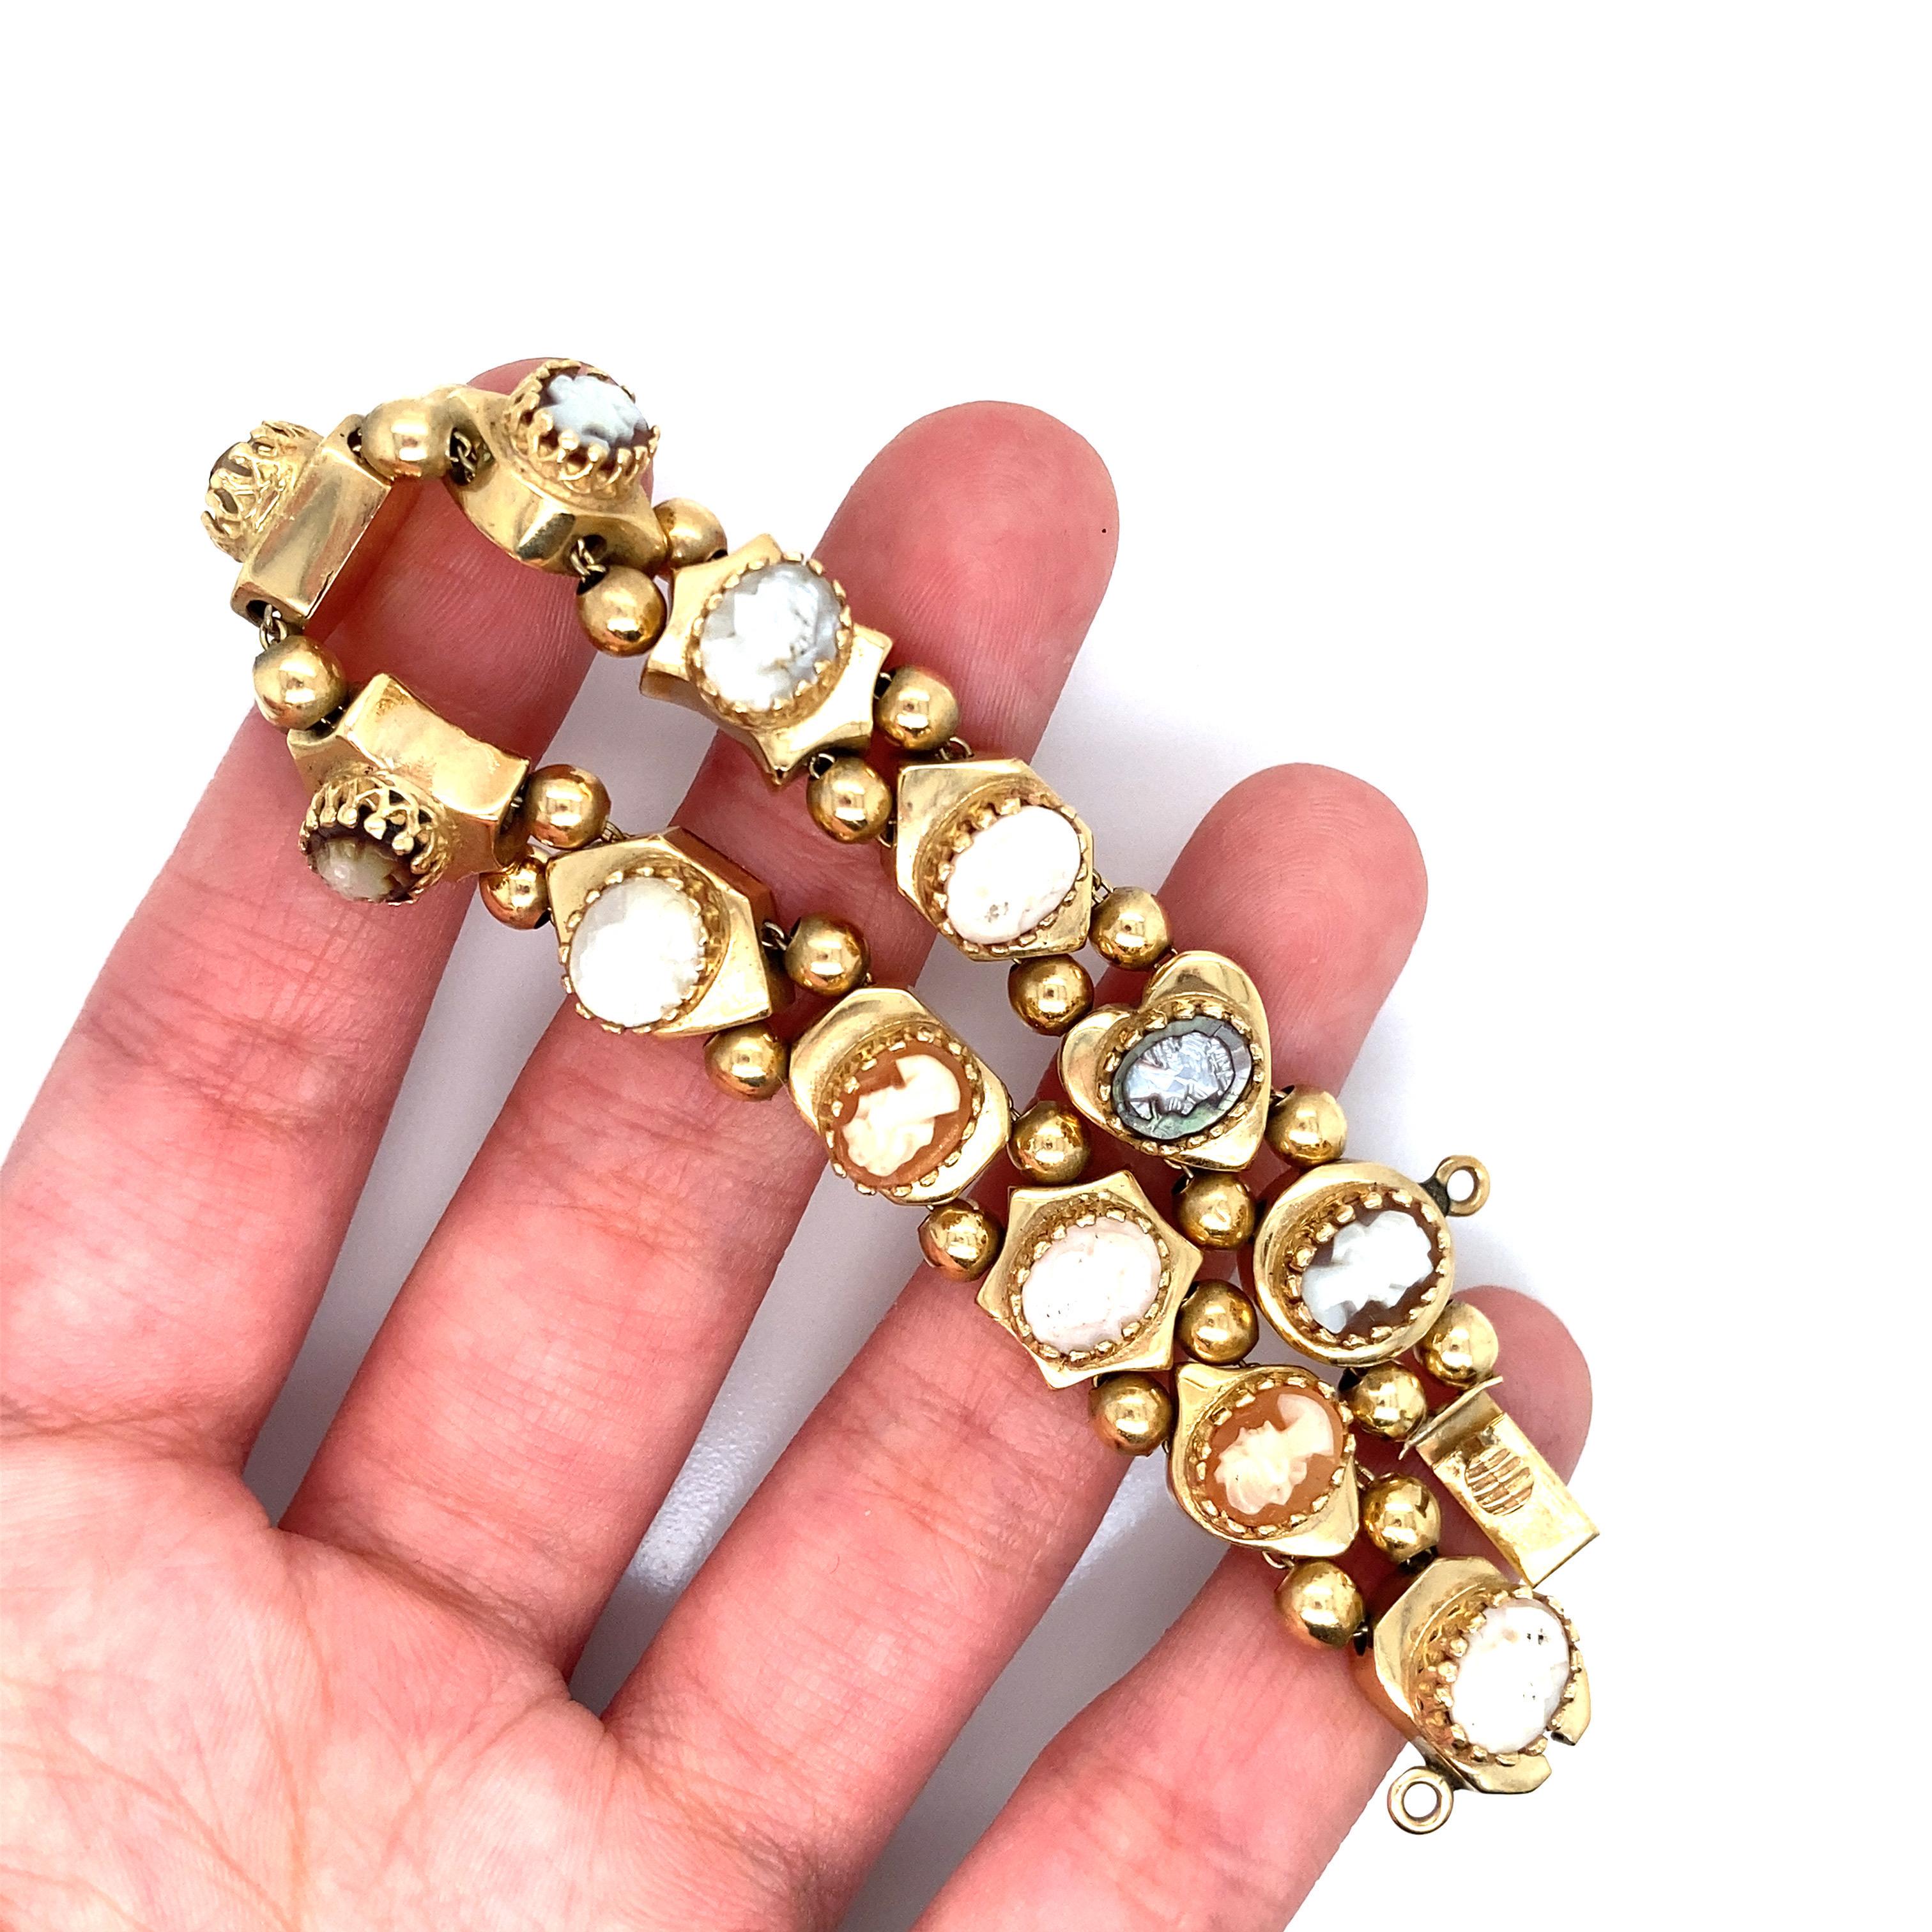 Vintage 14K Yellow Gold Cameo Slide Charm Bracelet In Good Condition For Sale In Boston, MA